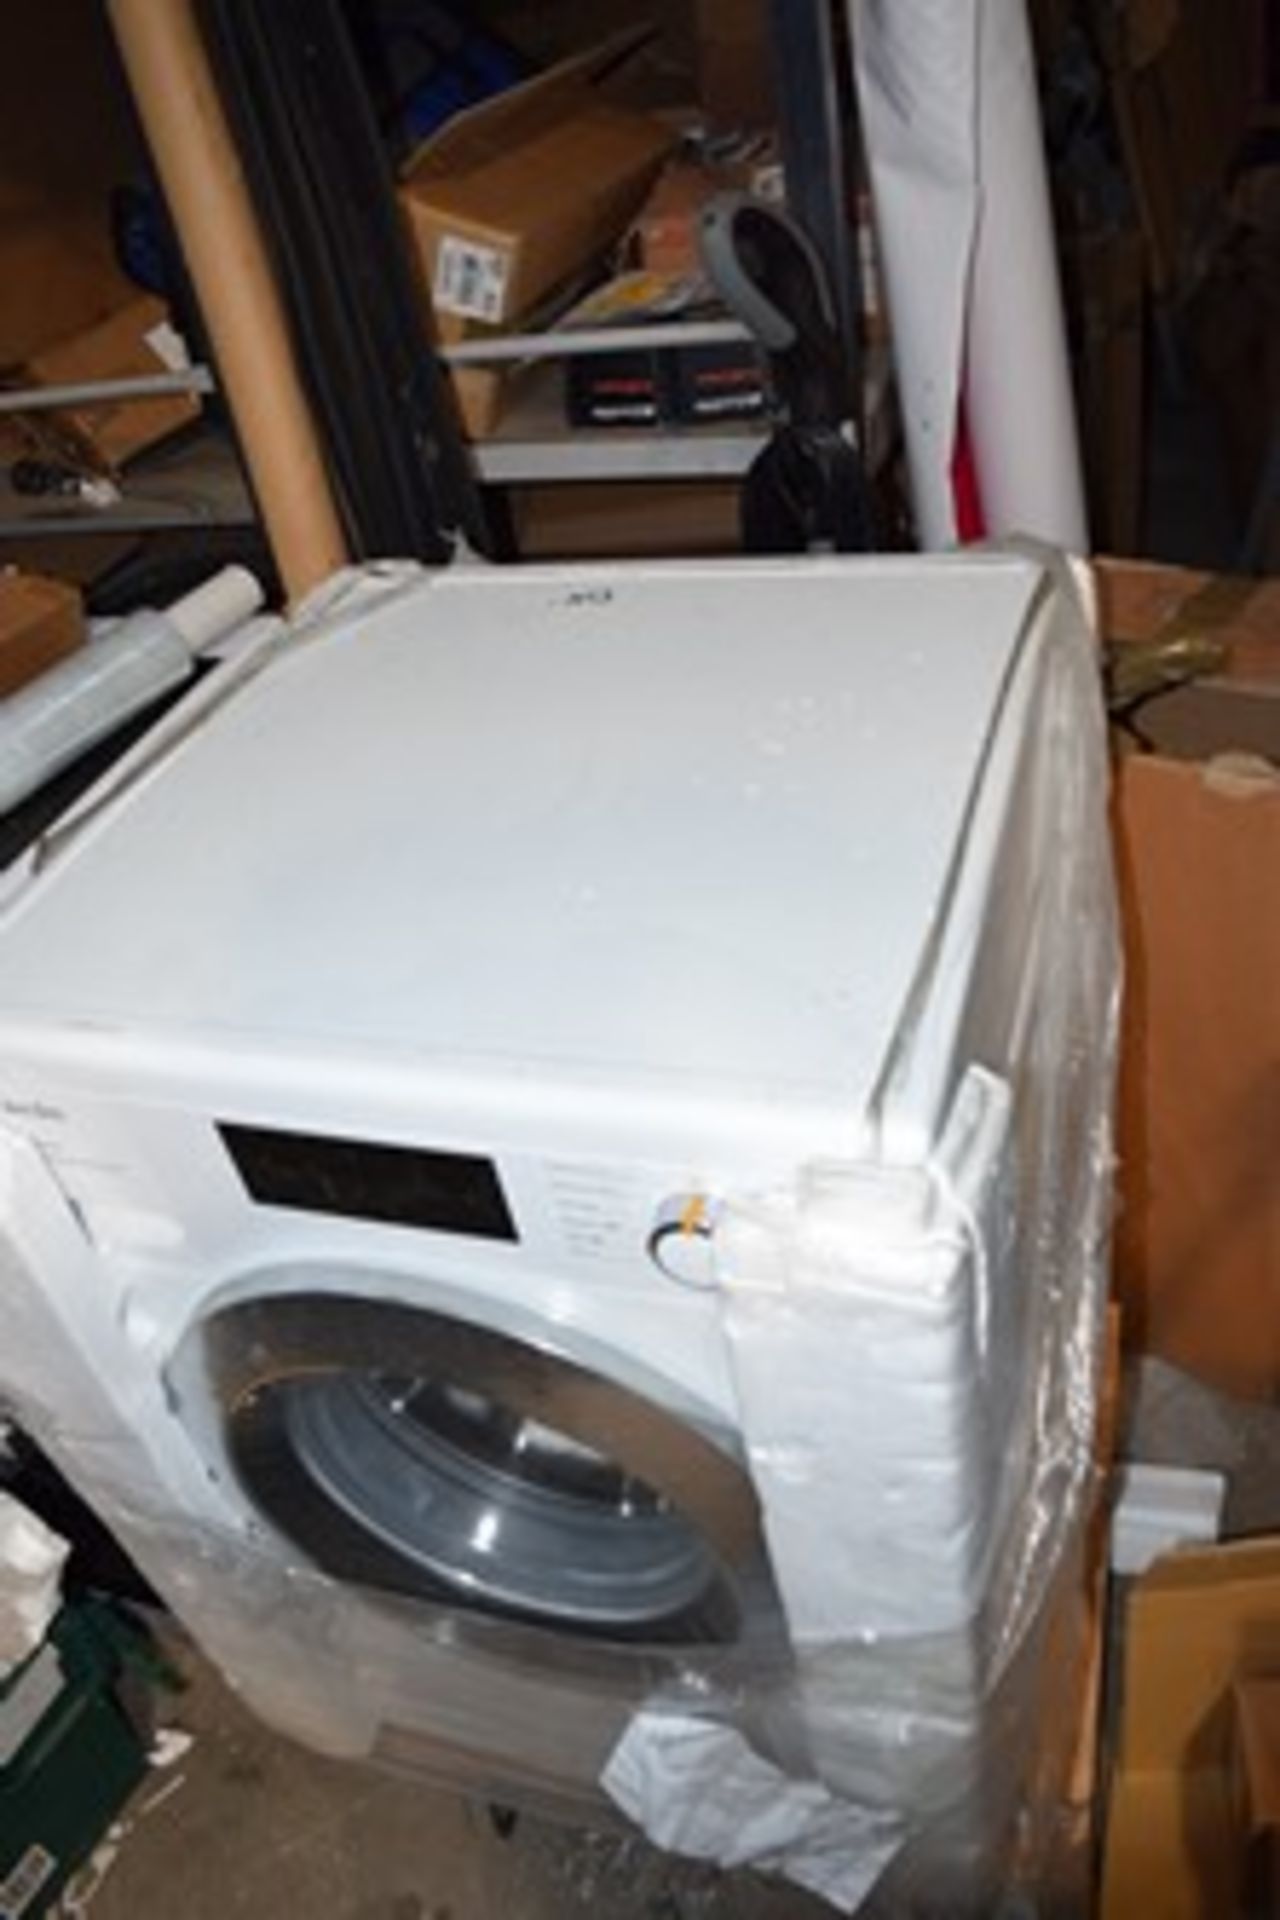 1 x Miele W1 smart washing machine, model WEI865 WCS. Powers on ok but unable to test full functiona - Image 2 of 4